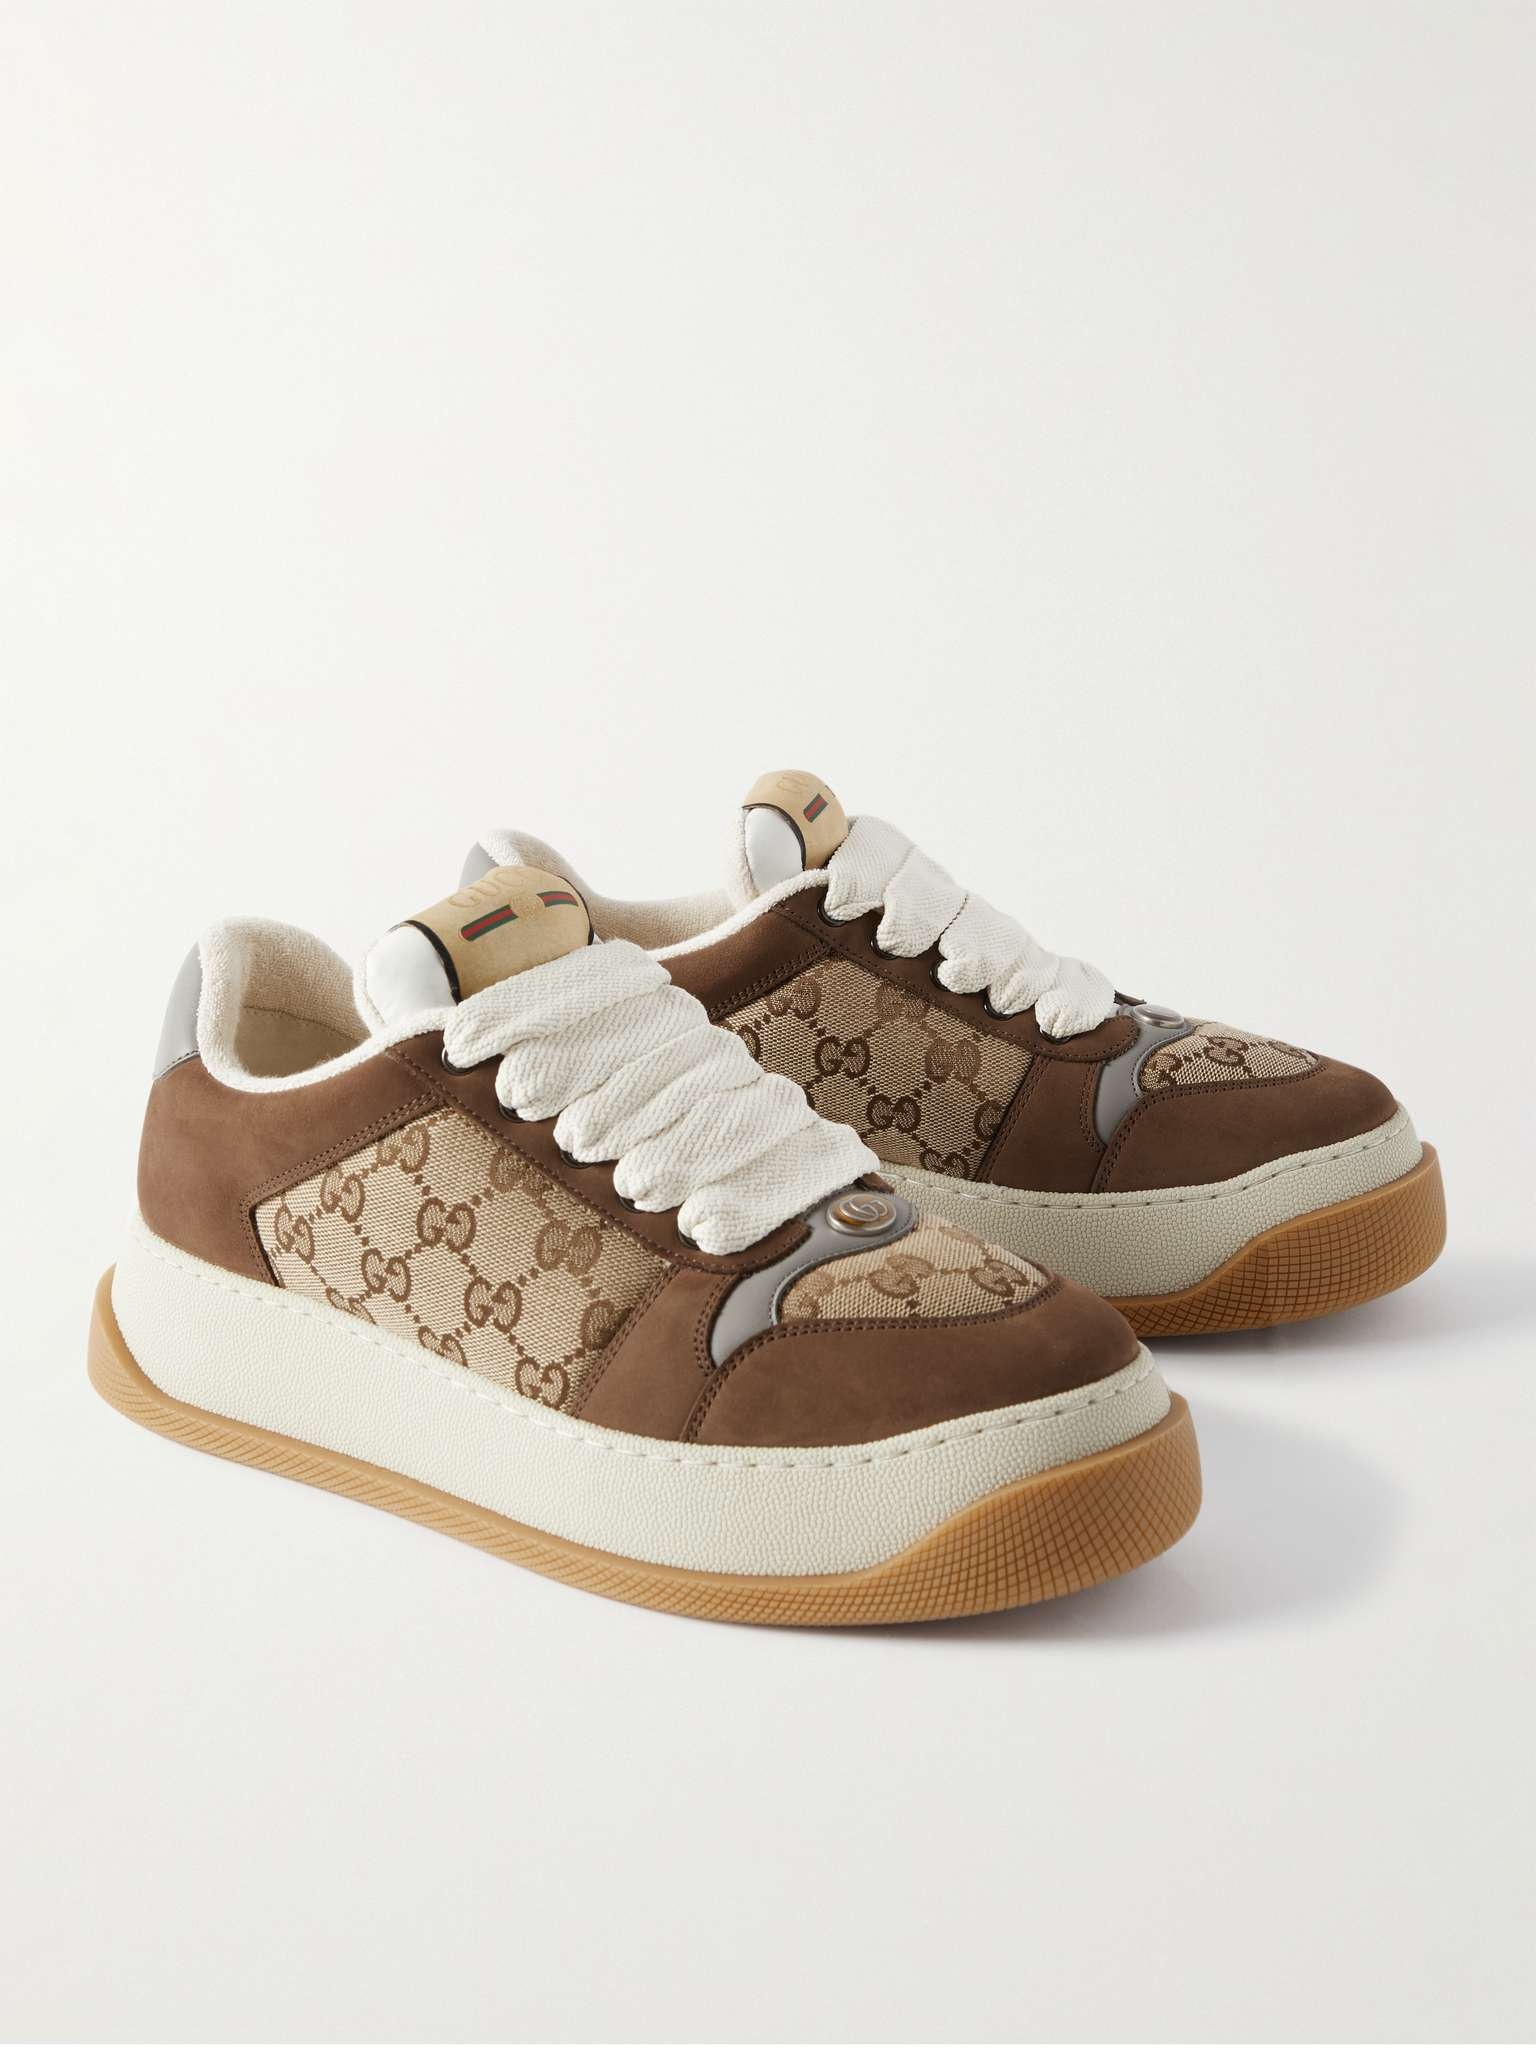 Screener Monogrammed Canvas, Suede and Leather Sneakers - 4